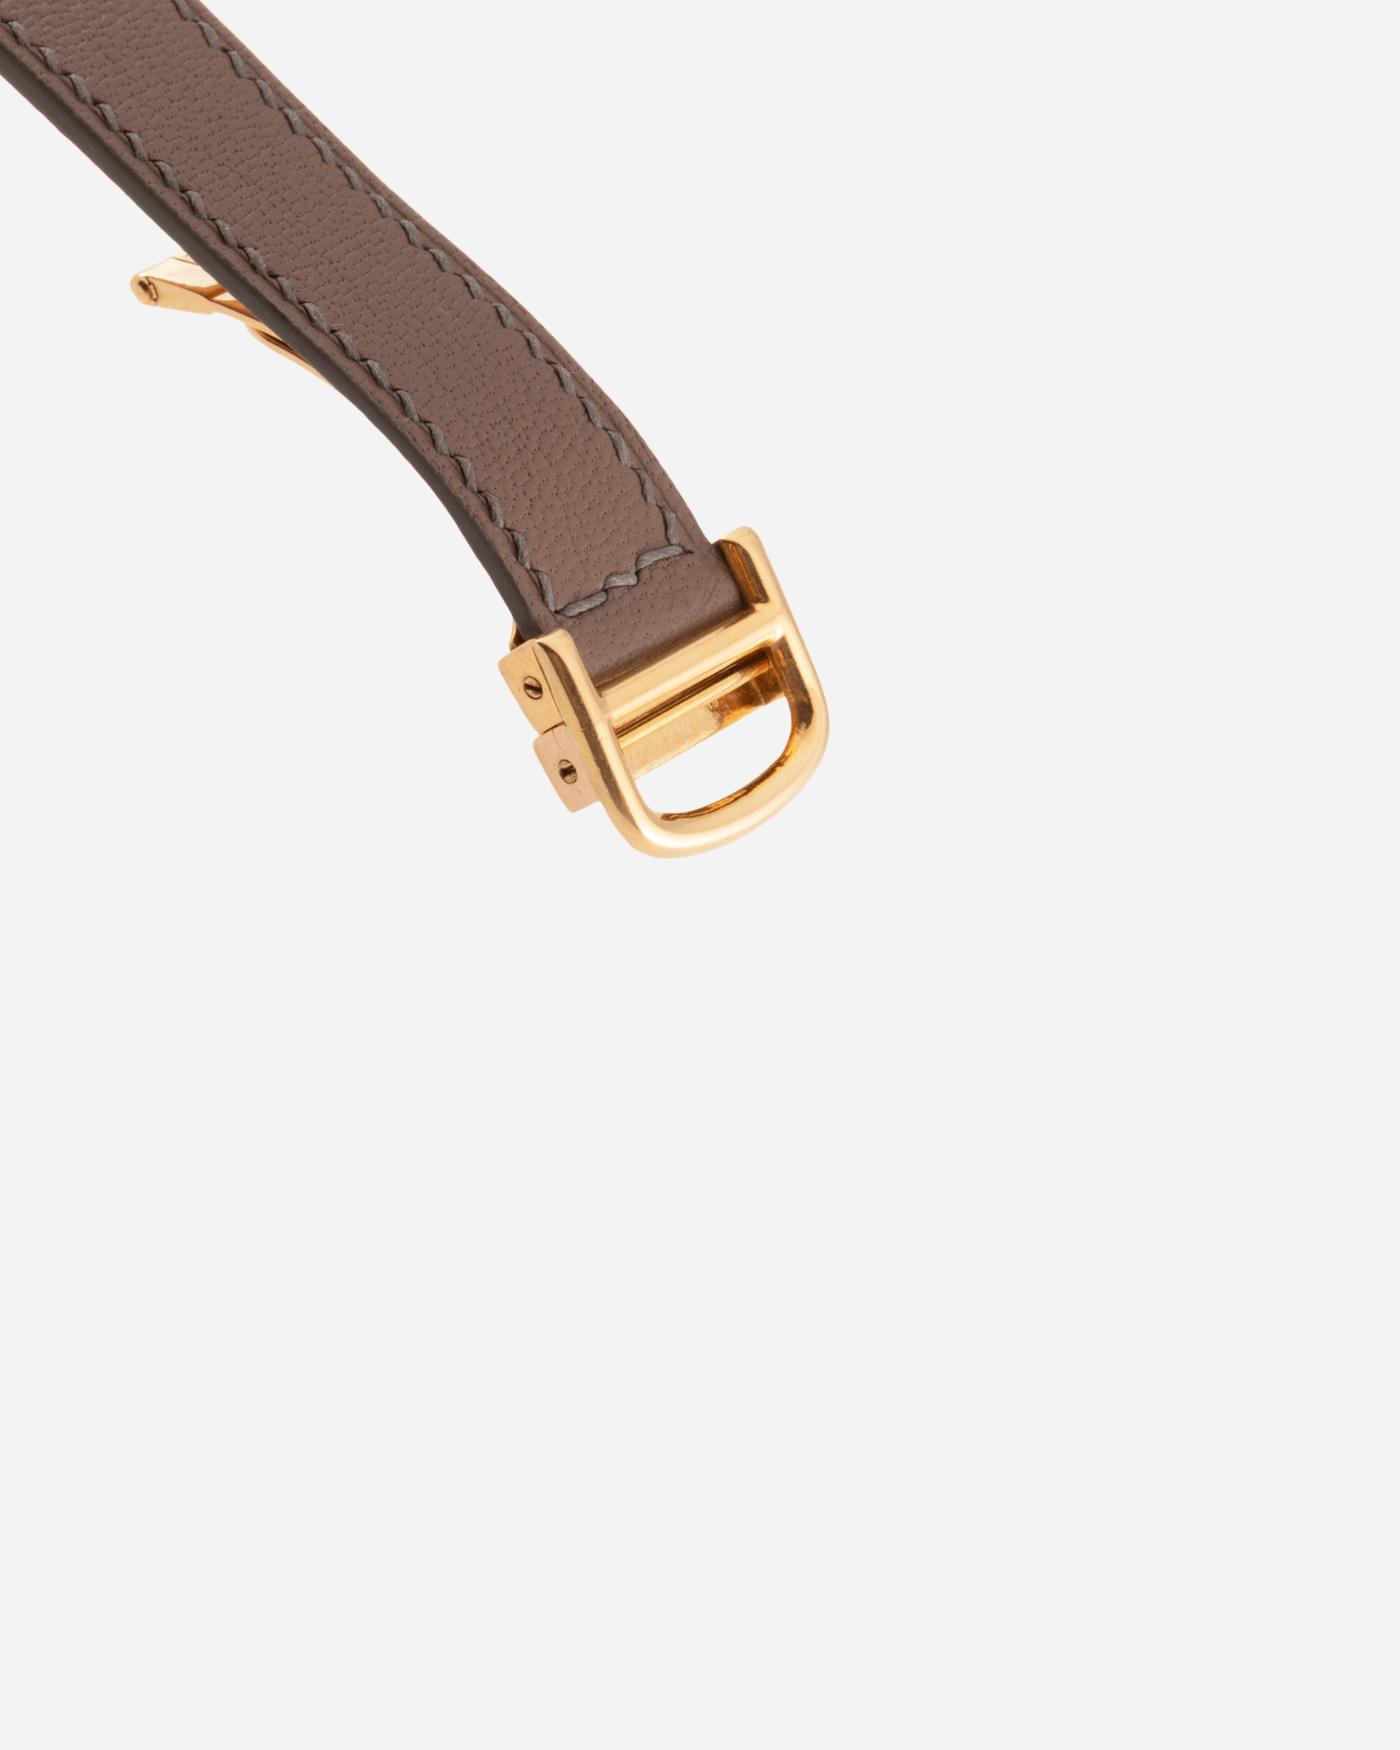 Brand: Cartier Year: 1970’s Model: Tank Cintree Mid Size Material: 18k Yellow Gold Movement: Manually Wound Jaeger Movement Case Diameter: 36mm X 20mm Strap: Custom Taupe Leather Strap and Original 18k Yellow Gold Cartier Deployant